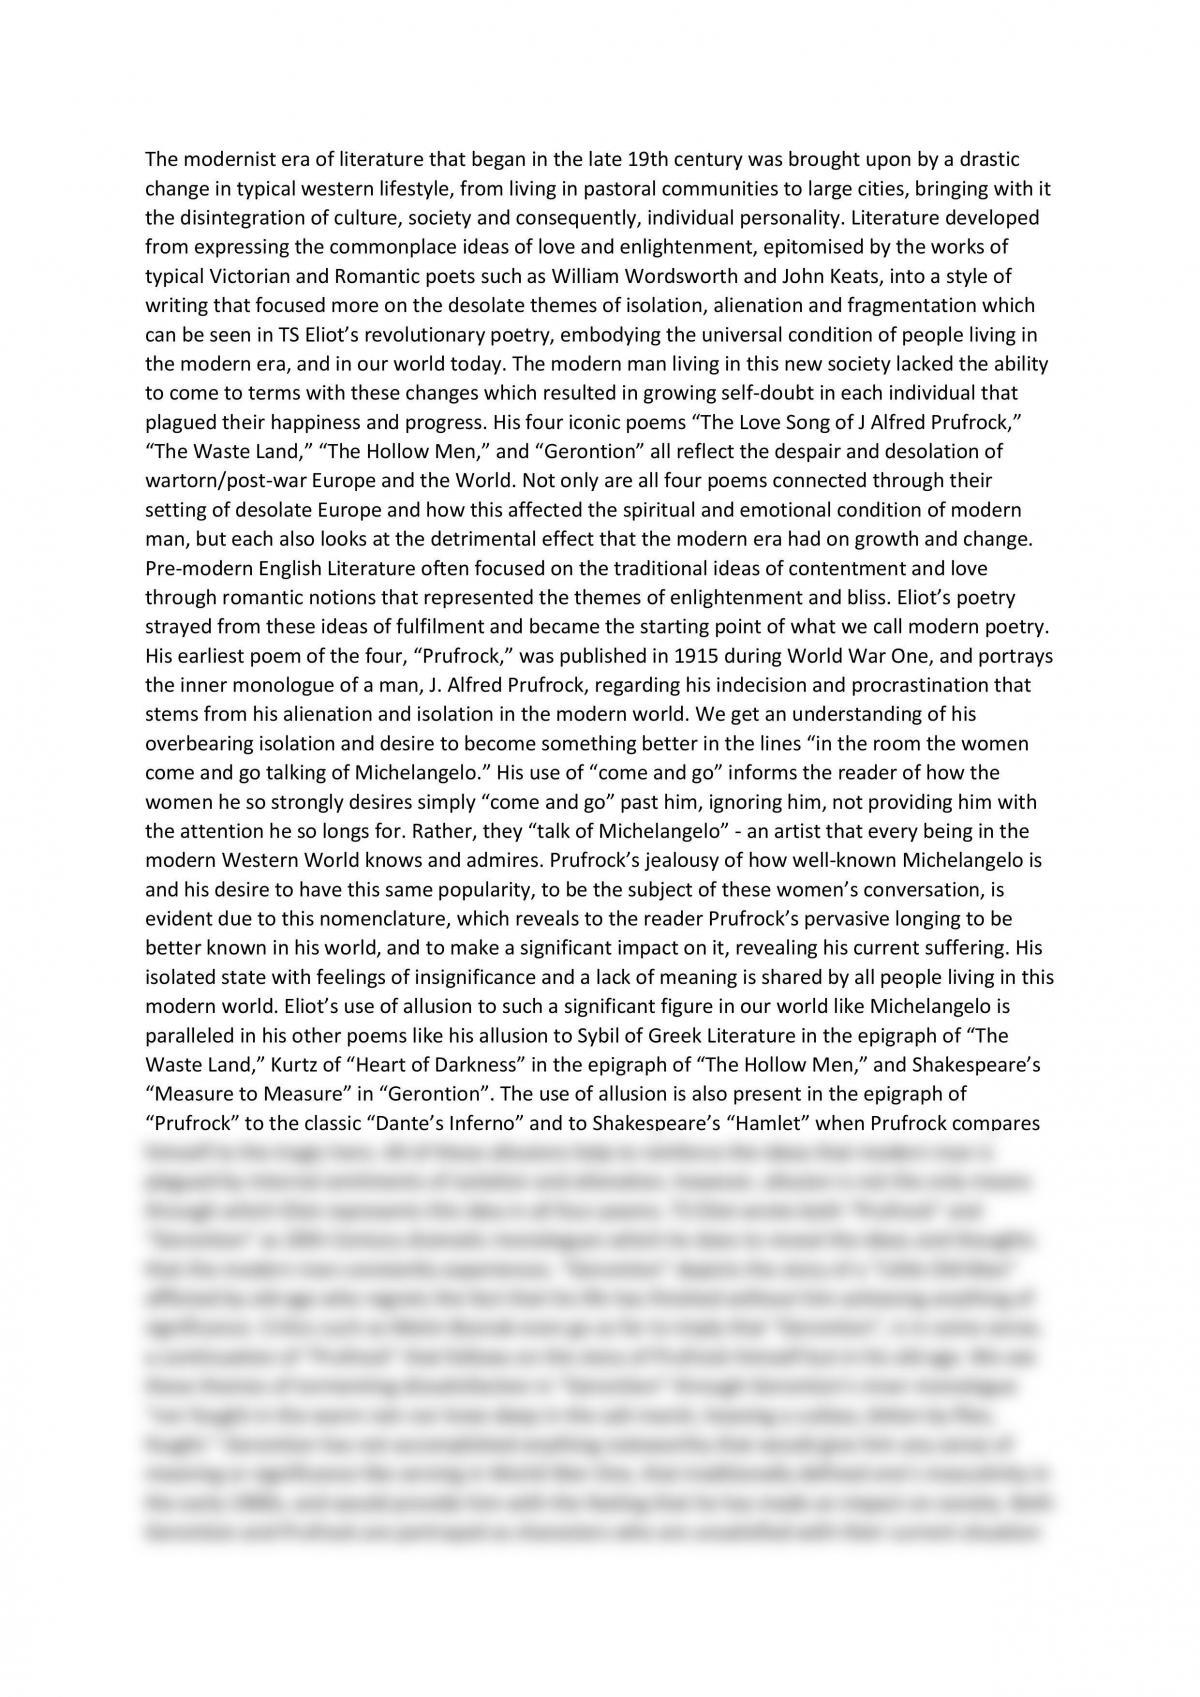 NCEA 3.4 English Connections Essay For T.S Eliot - Page 1